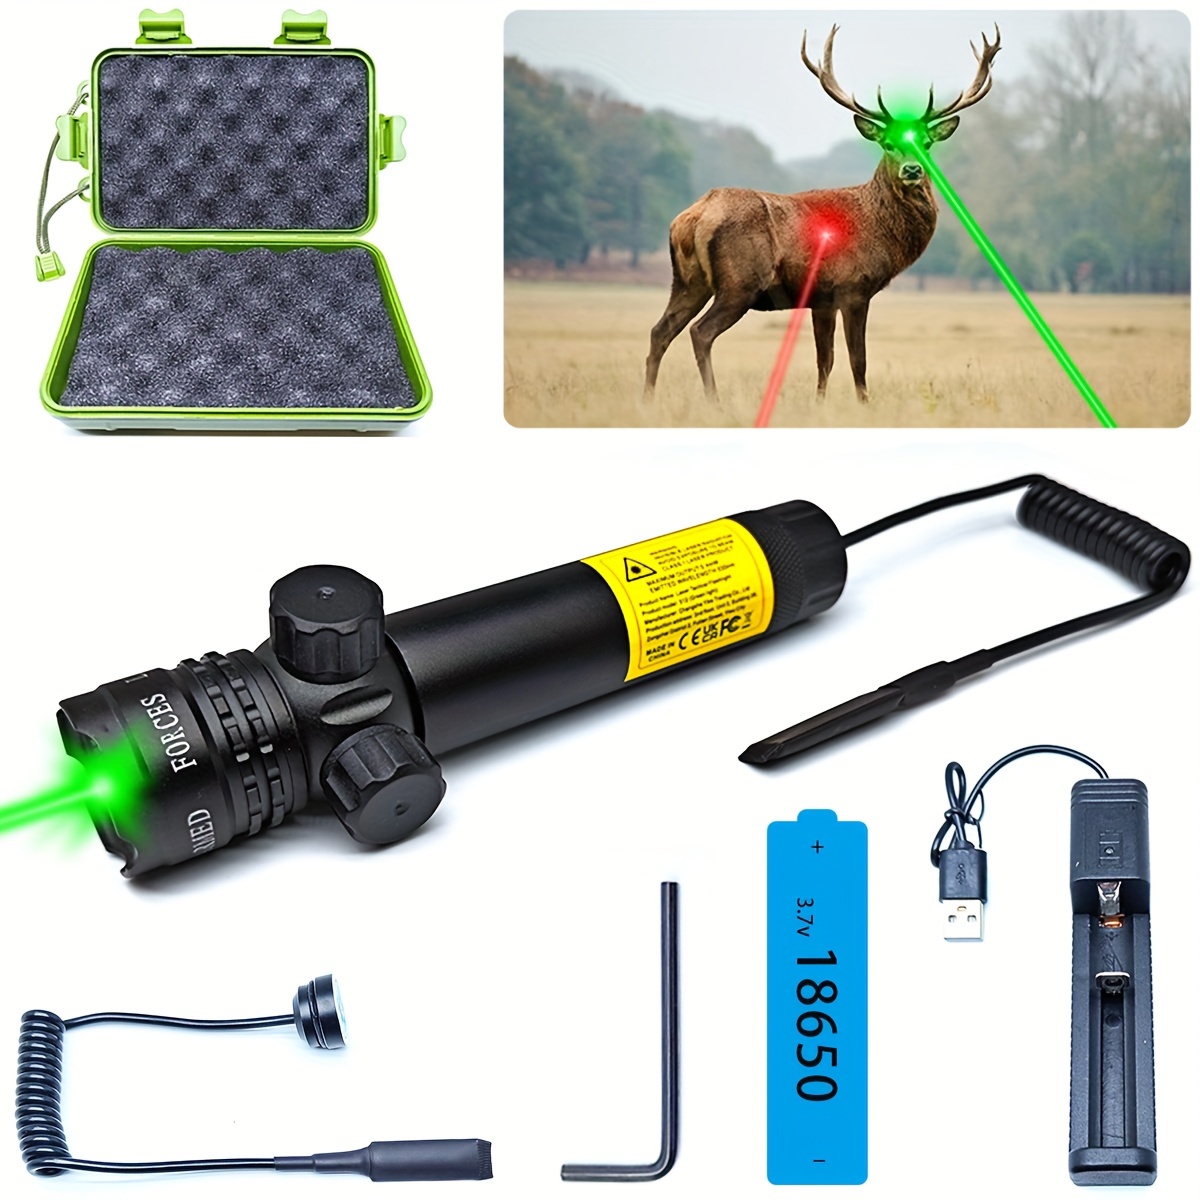 Green Laser Pointer High Power Long Range Adjustable Focus Tactical Strong  Green Light Pointer for Indoor Teaching,Outdoor Astronomy Camping Hunting  Hiking Travel,Portable Cat Lazer Toy USB Recharge